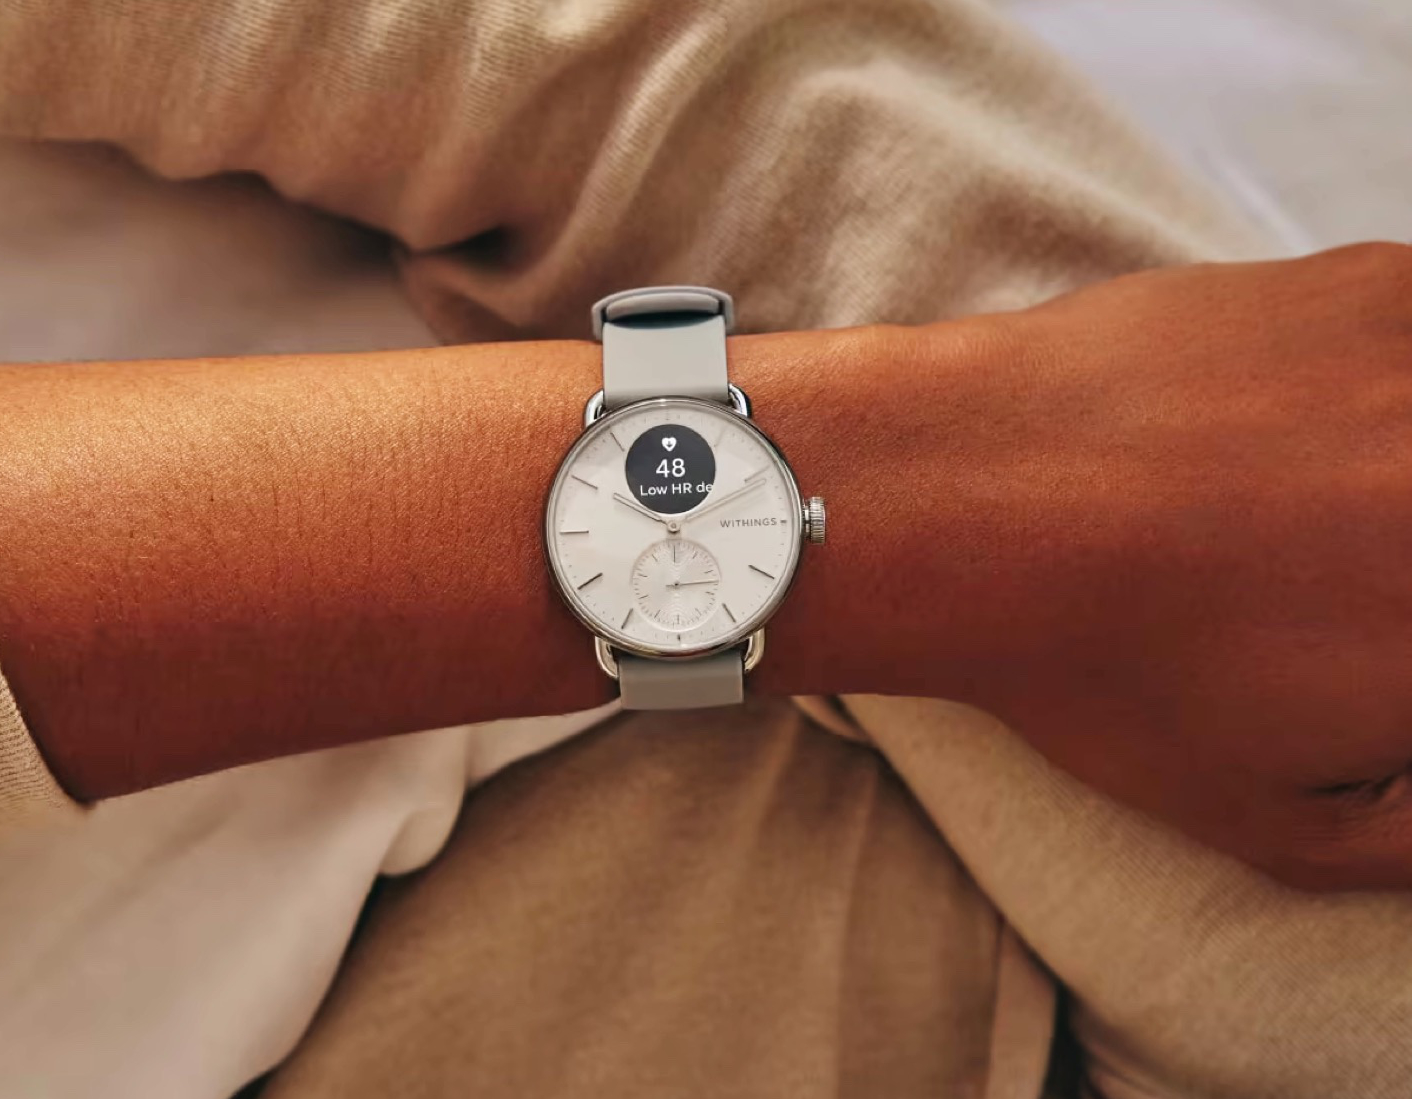 Withings ScanWatch 2 unveiled with ECG, skin temperature sensor and up to 30 days of battery life